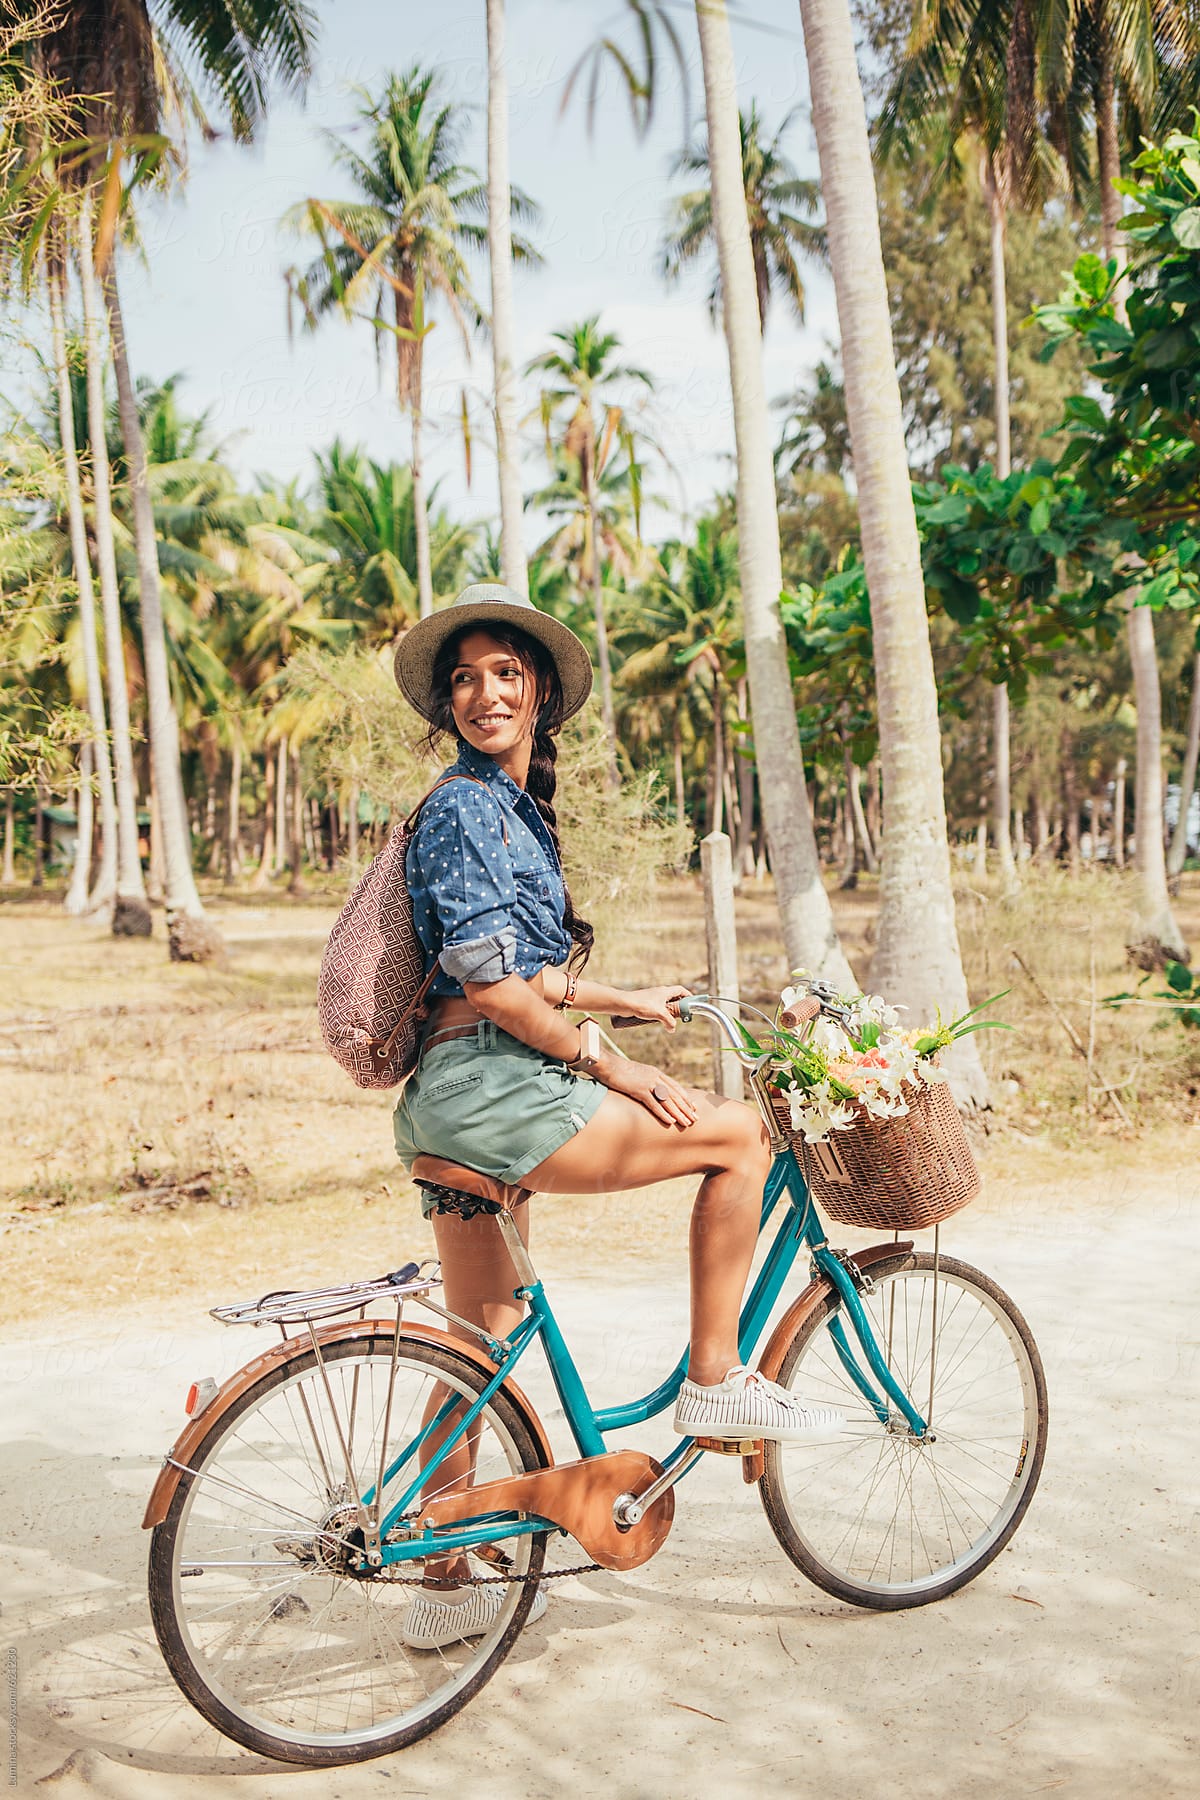 Happy Woman Riding a Bicycle in a Tropical Setting